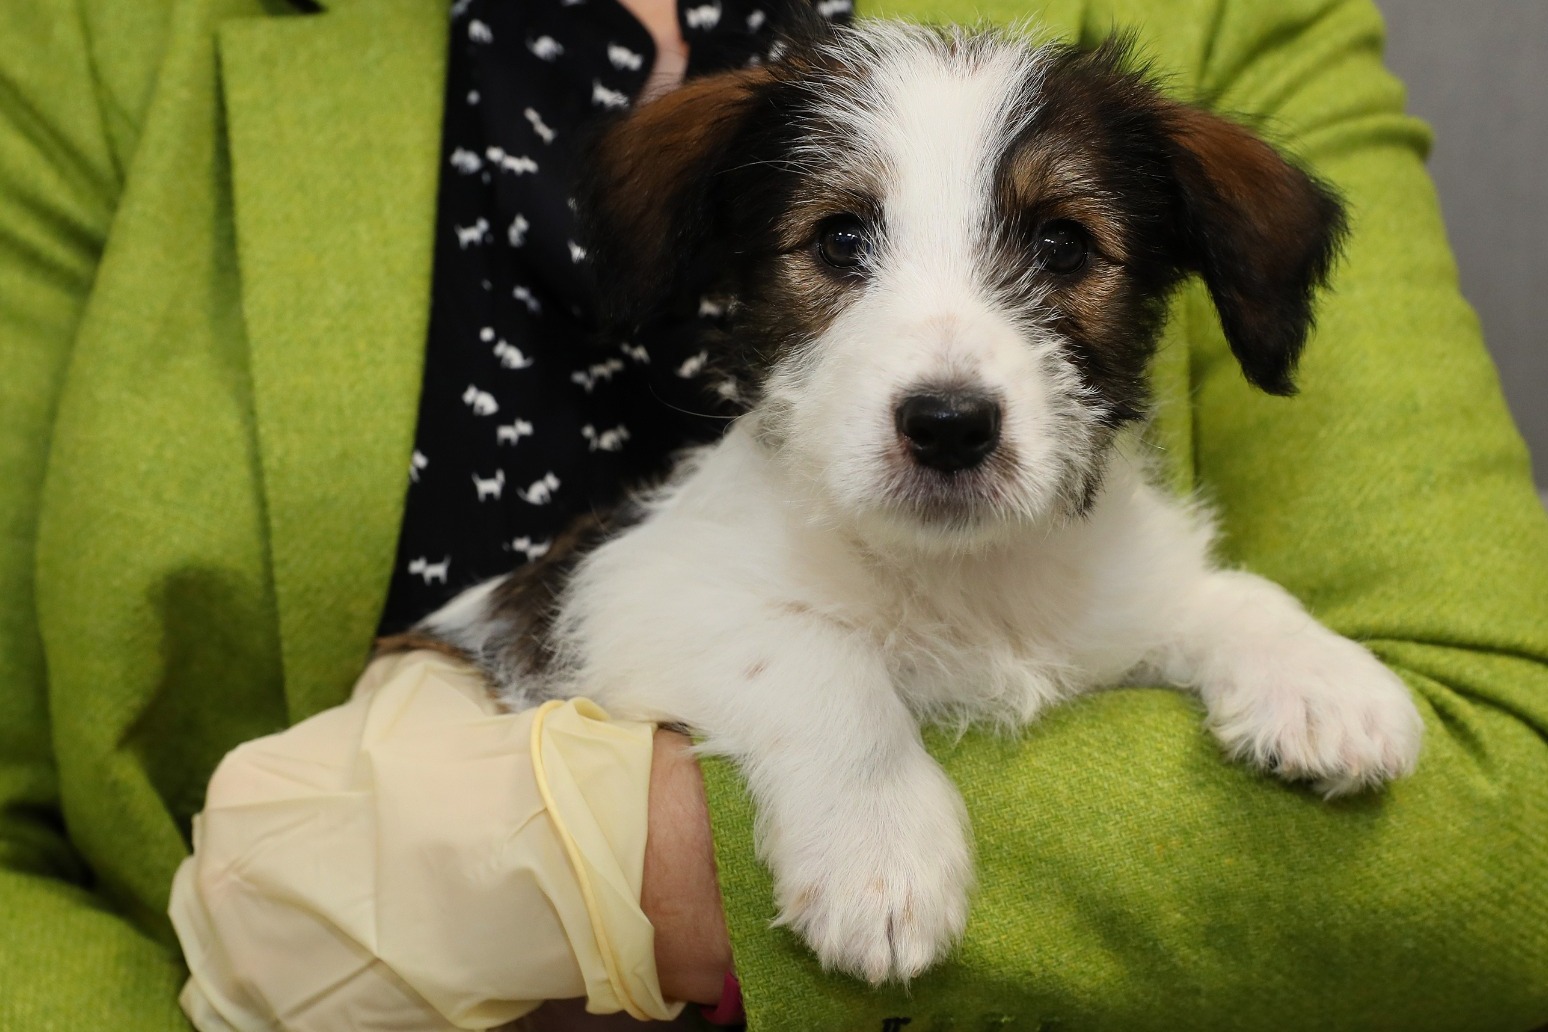 People buying a puppy this Christmas warned to avoid criminal sellers 